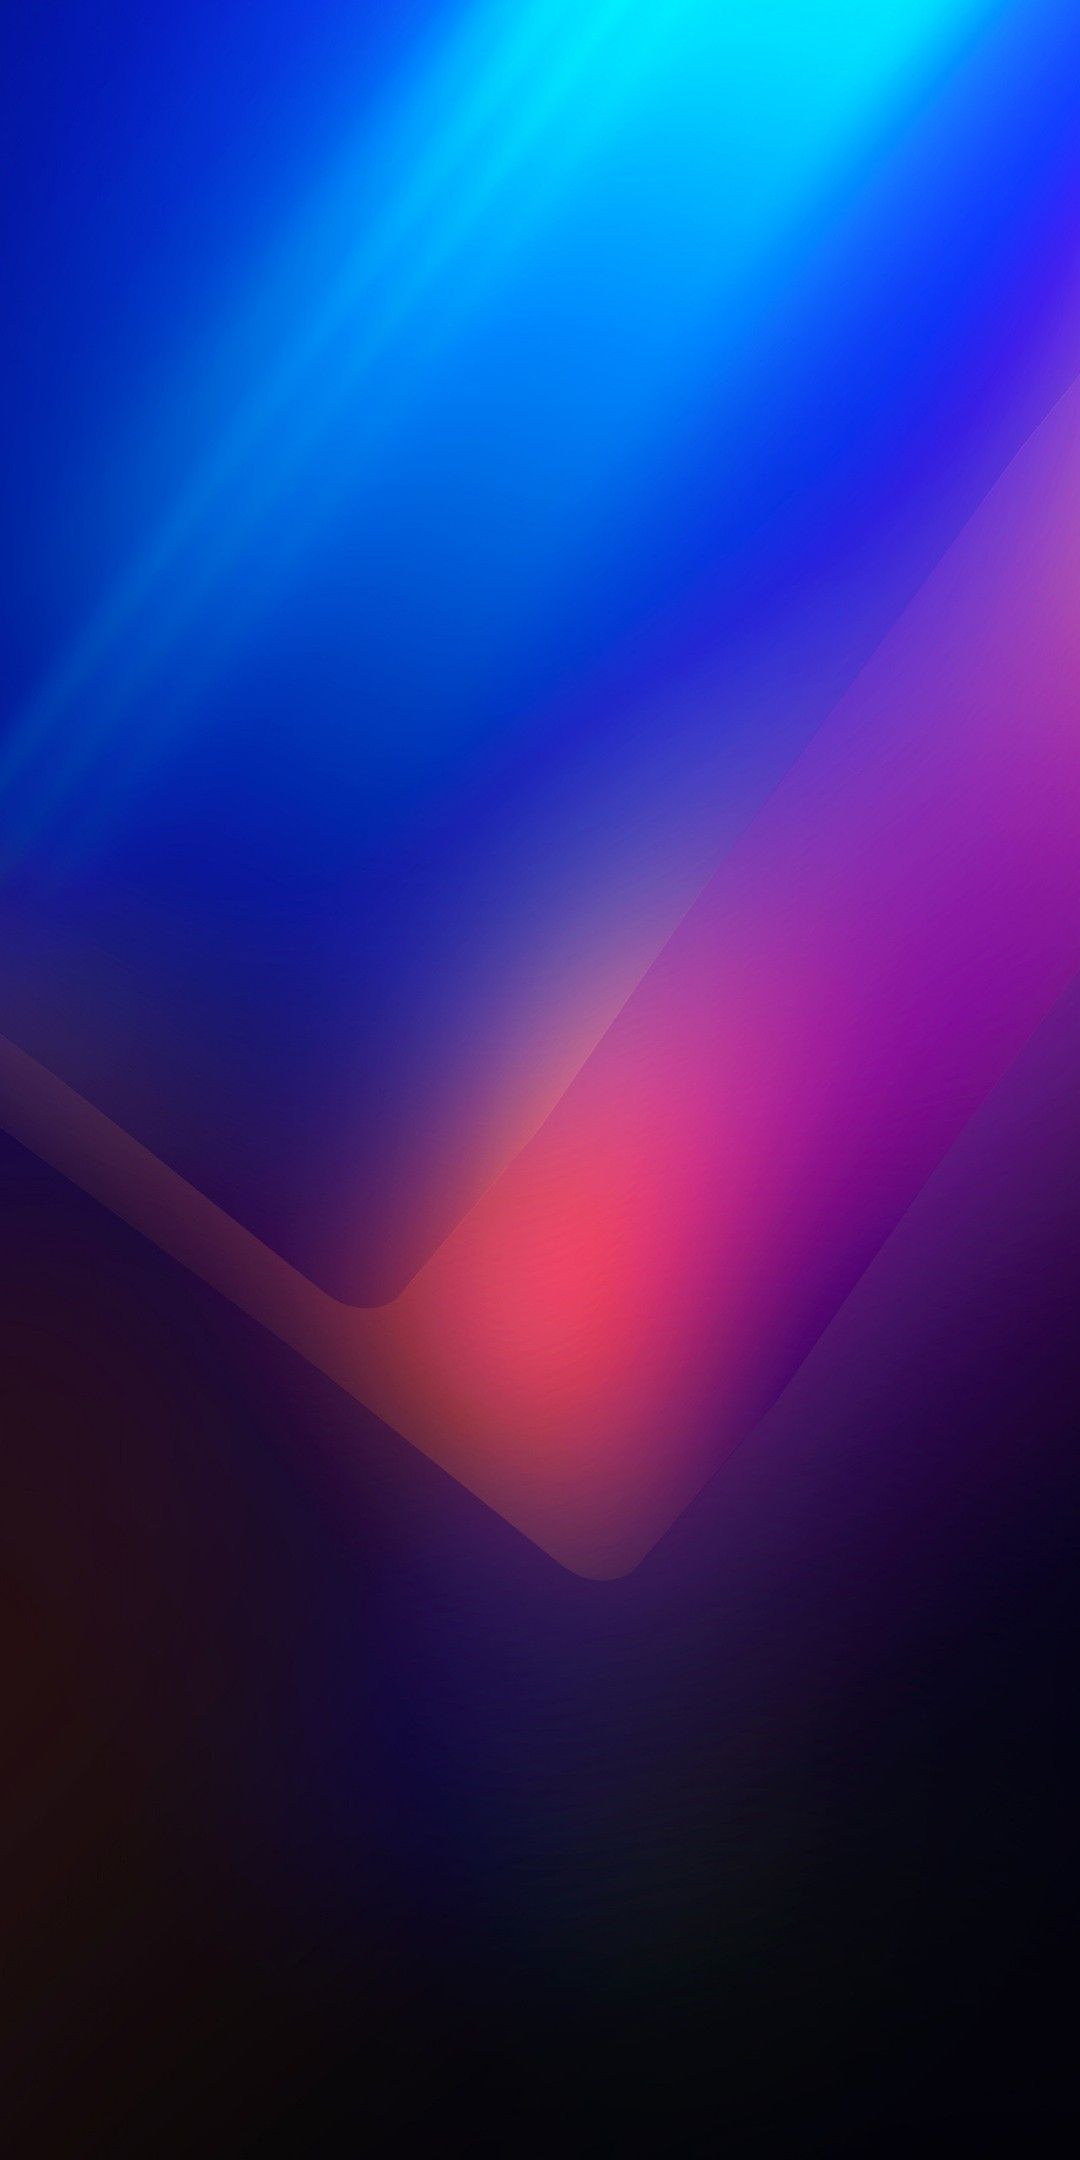 Redmi Pro A Spectacular Wallpaper And Or Background For Your